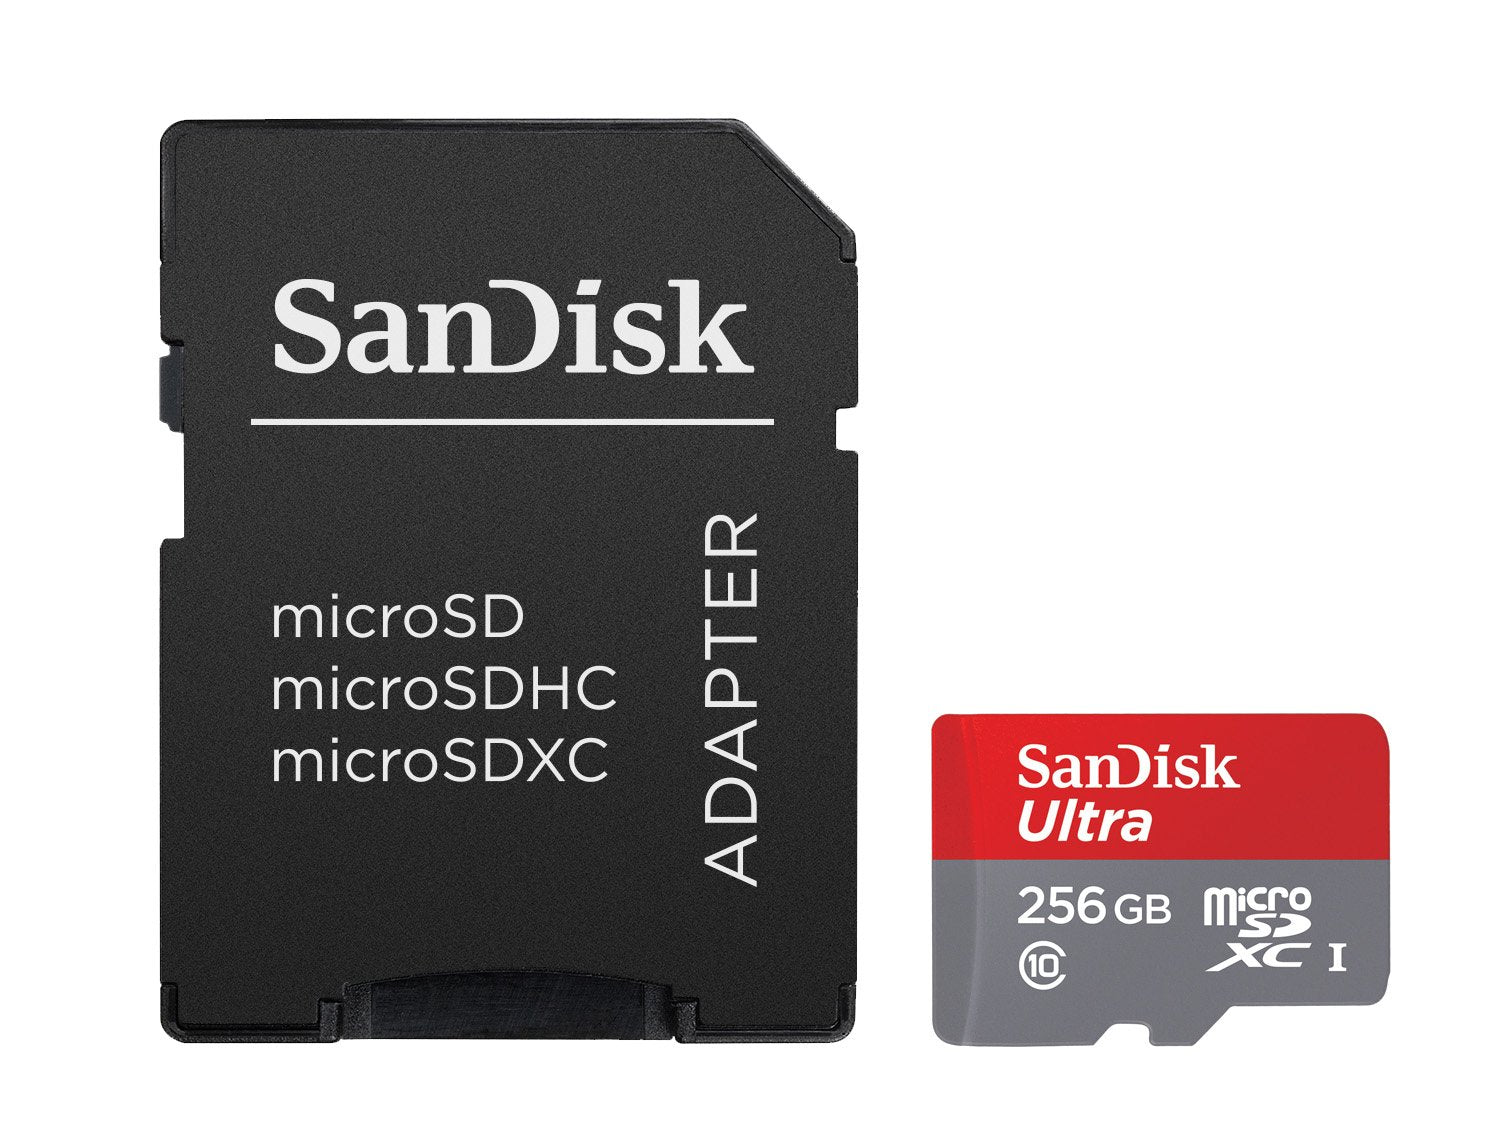 SanDisk Ultra 256GB MicroSDXC UHS-I Card with Adapter (SDSQUNI-256G-GN6MA)